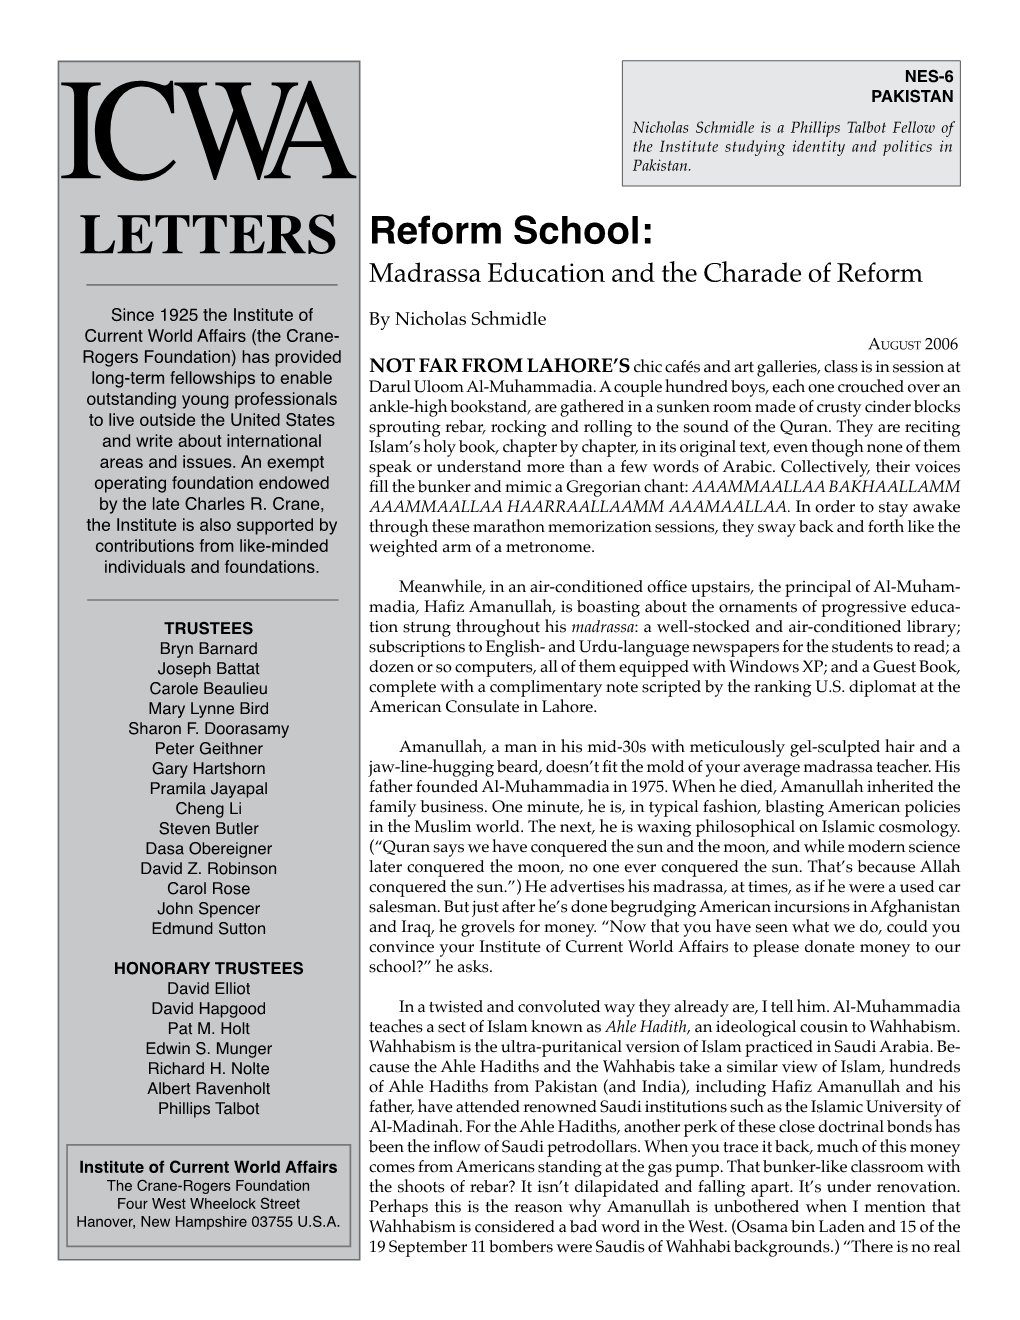 Reform School: Madrassa Education and the Charade of Reform